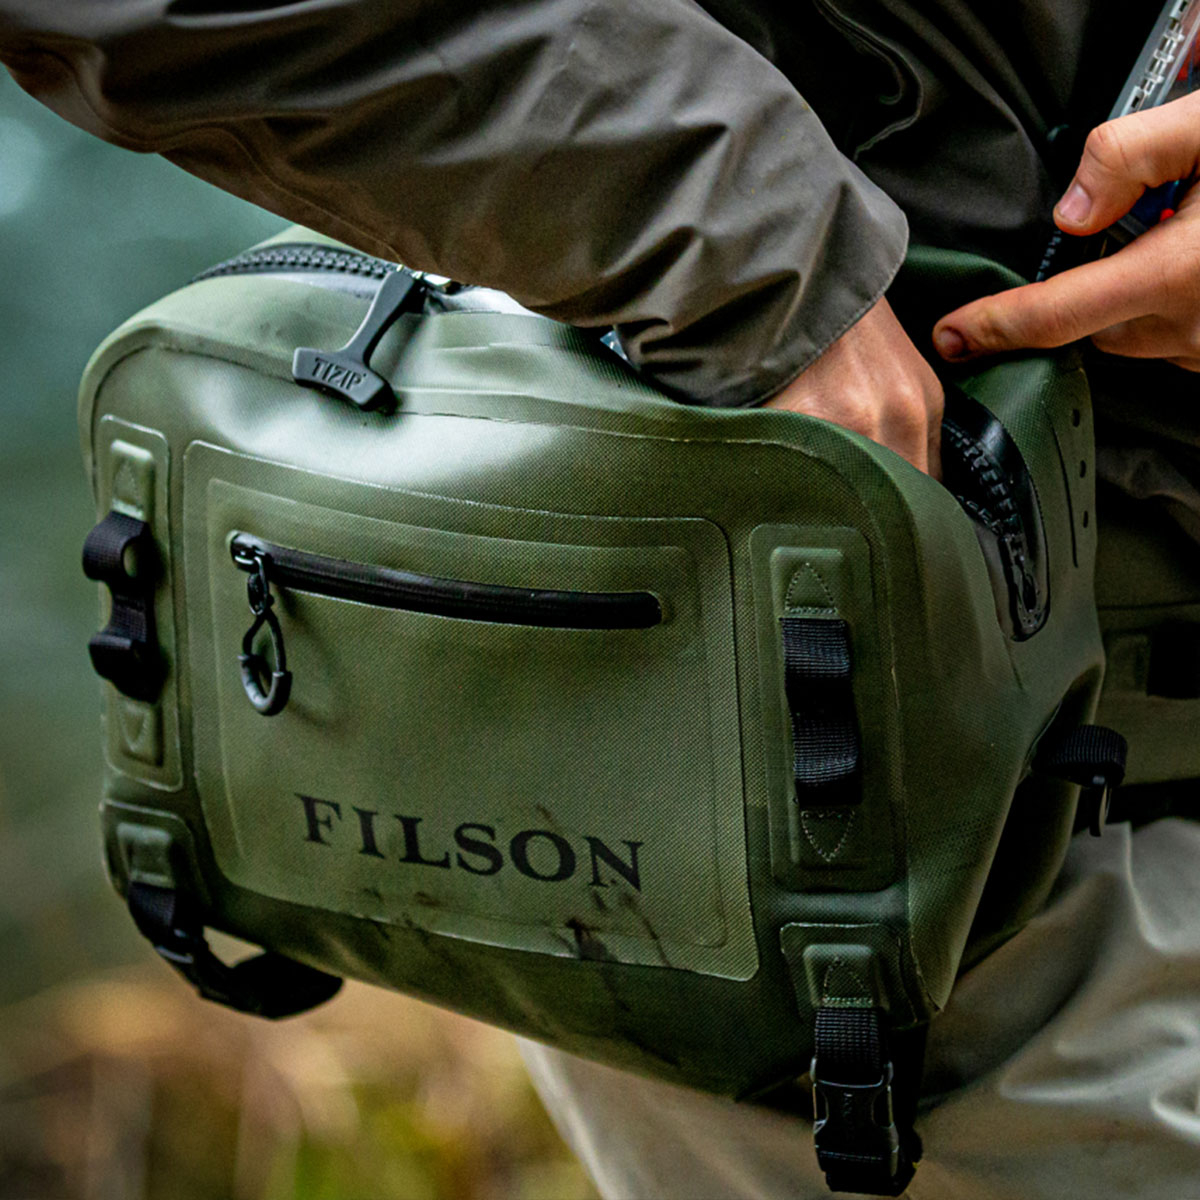 Filson Dry Waist Pack Green, high-capacity, waterproof waist pack with supportive, padded hip belt